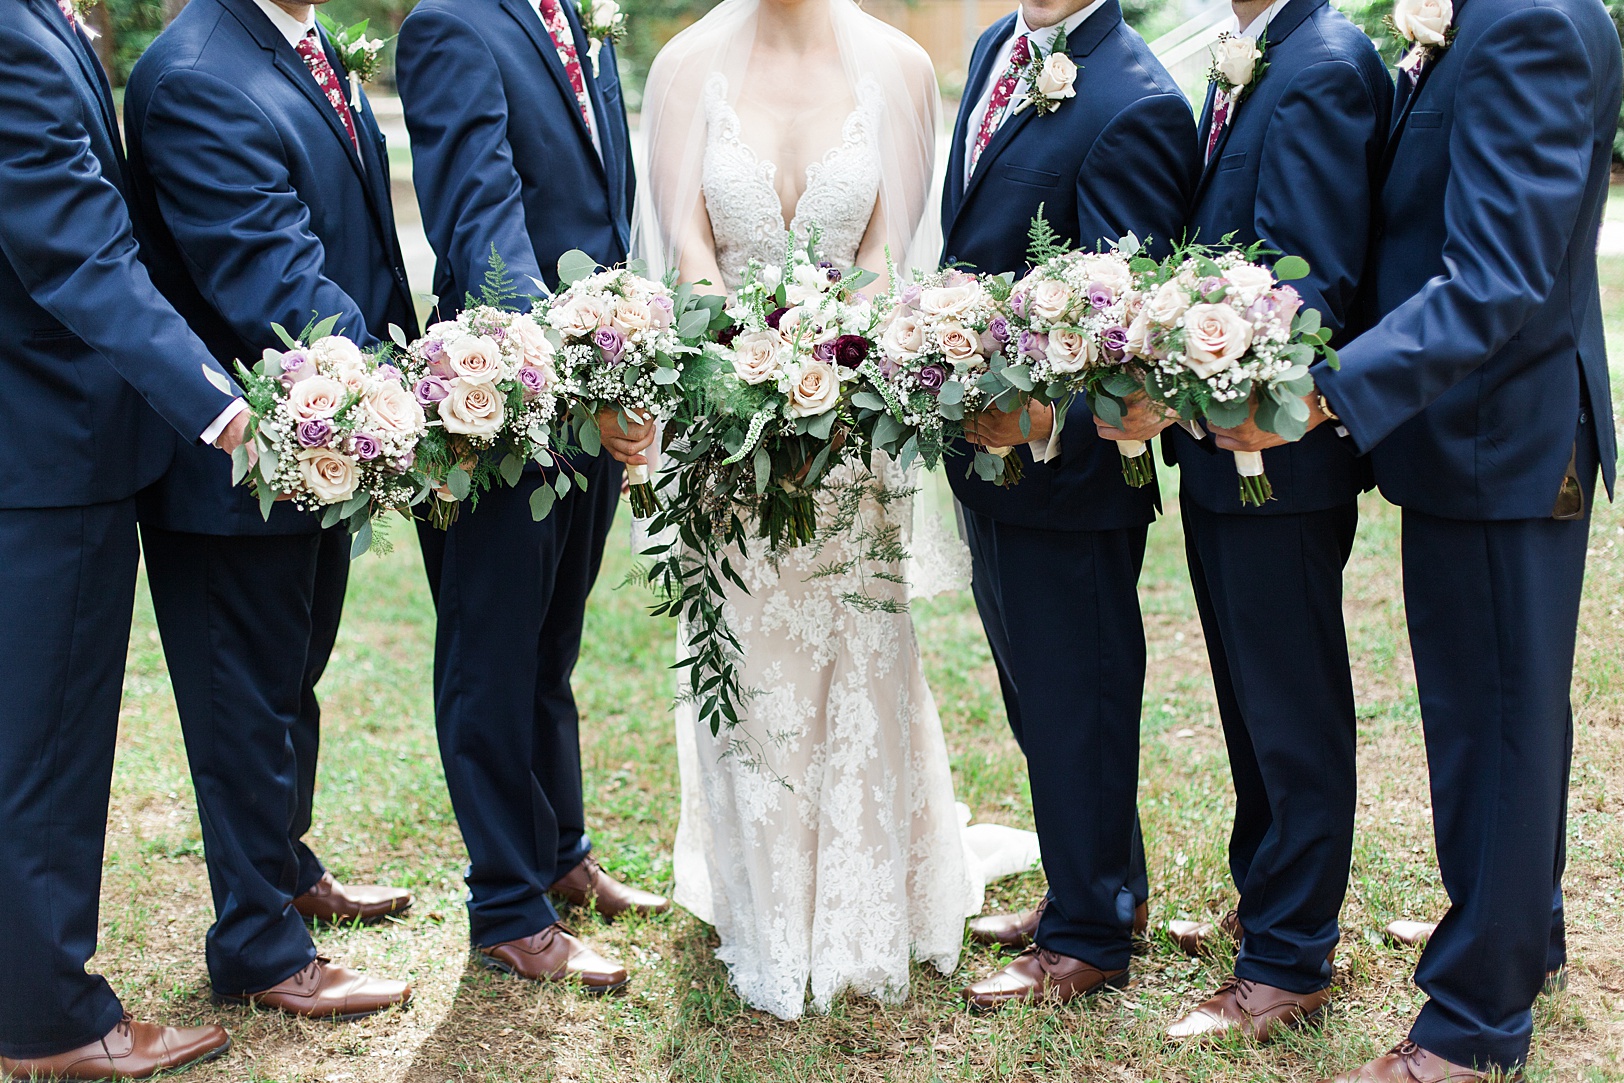 Bride with Groomsmen holding Bouquets | Kaitlin Scott Photography